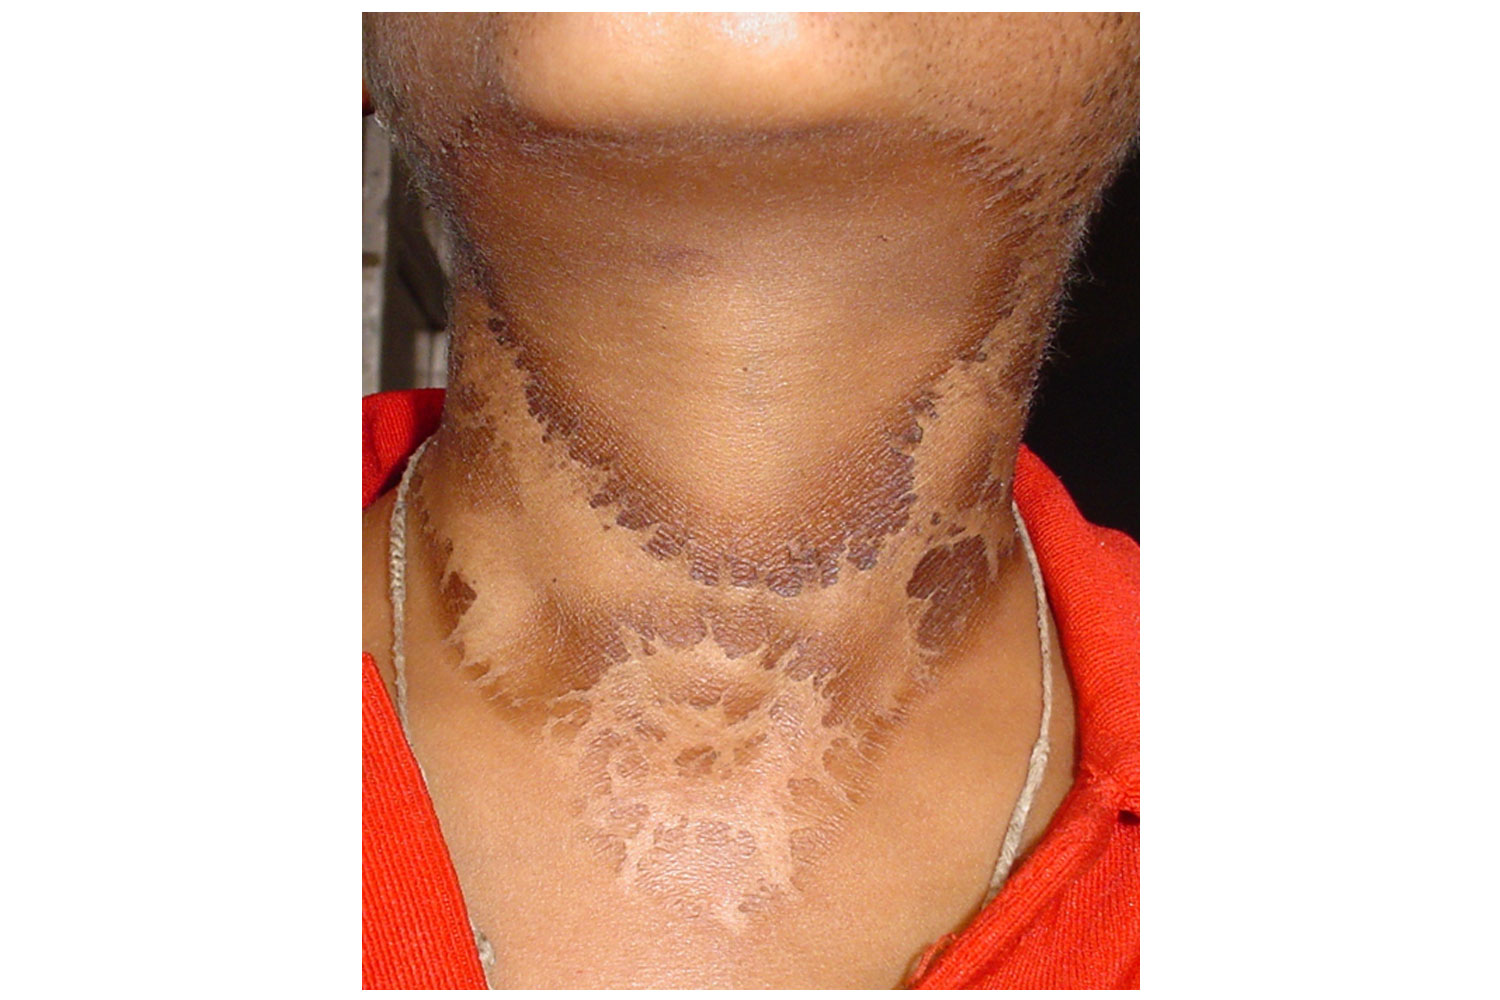 A Case Of Classical Casal's Necklace In An 8 Year Old Boy